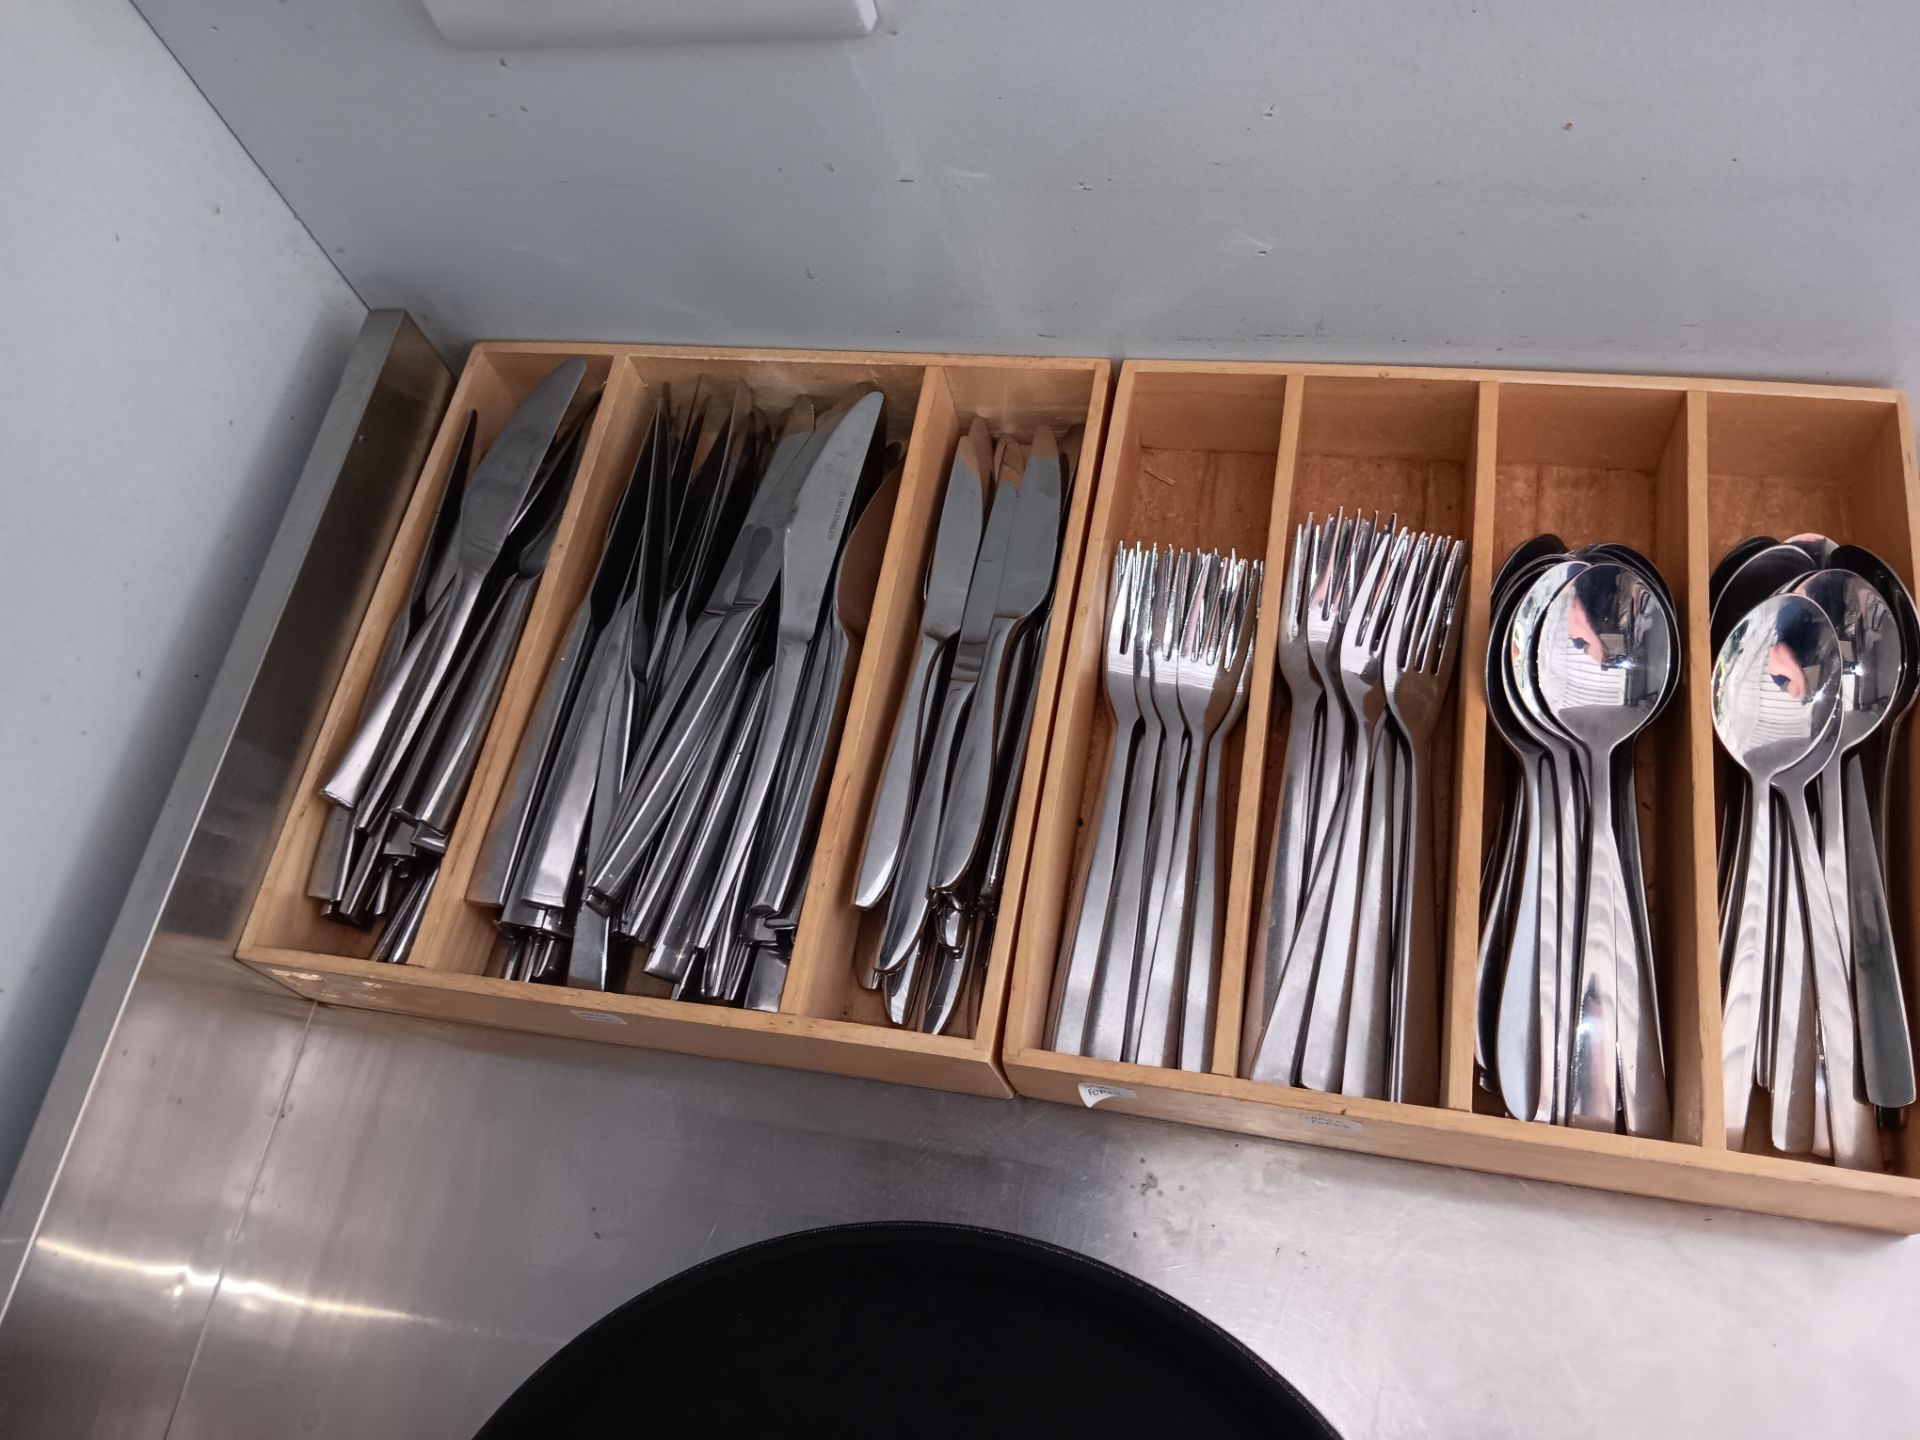 Kitchen sundries to include kettle, stainless steel cutlery and various cooking utensils - Image 2 of 4